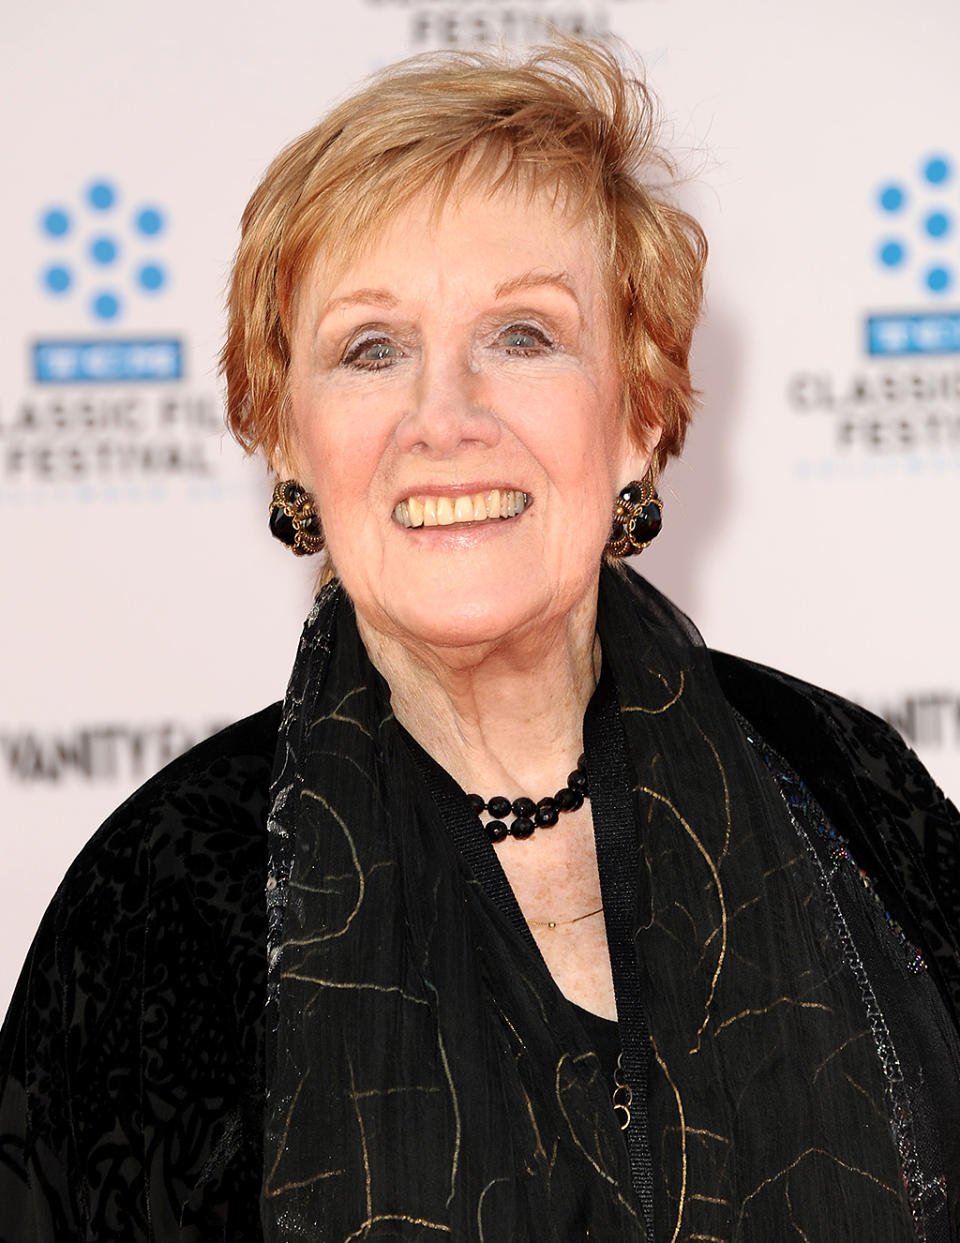 Marni Nixon was an American soprano and playback singer for featured actresses in movie musicals. She was best known for dubbing the singing voices of the leading actresses in films, including The King and I, West Side Story, and My Fair Lady. On July 24, she died after a long, off-and-on battle with breast cancer, which she had survived in 1985 and 2000. She was 86. (Photo: Getty Images)